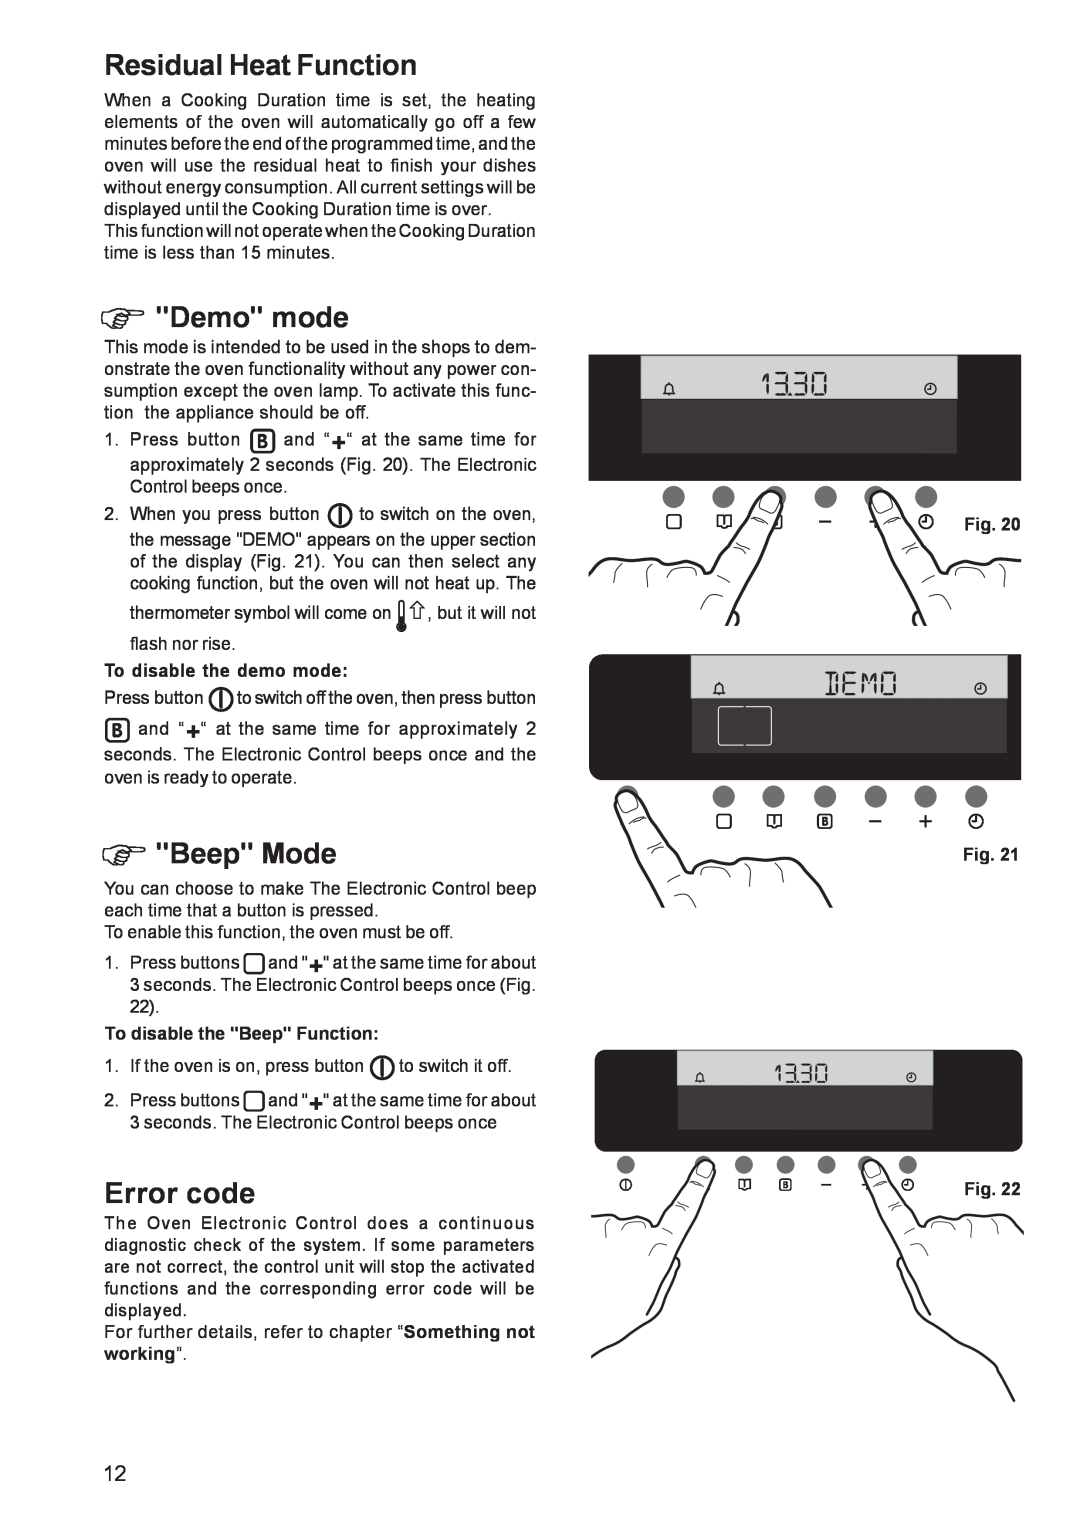 Zanussi ZBS 1063 manual Residual Heat Function, Demo mode, Beep Mode, Error code, To disable the demo mode, Fig. Fig. Fig 